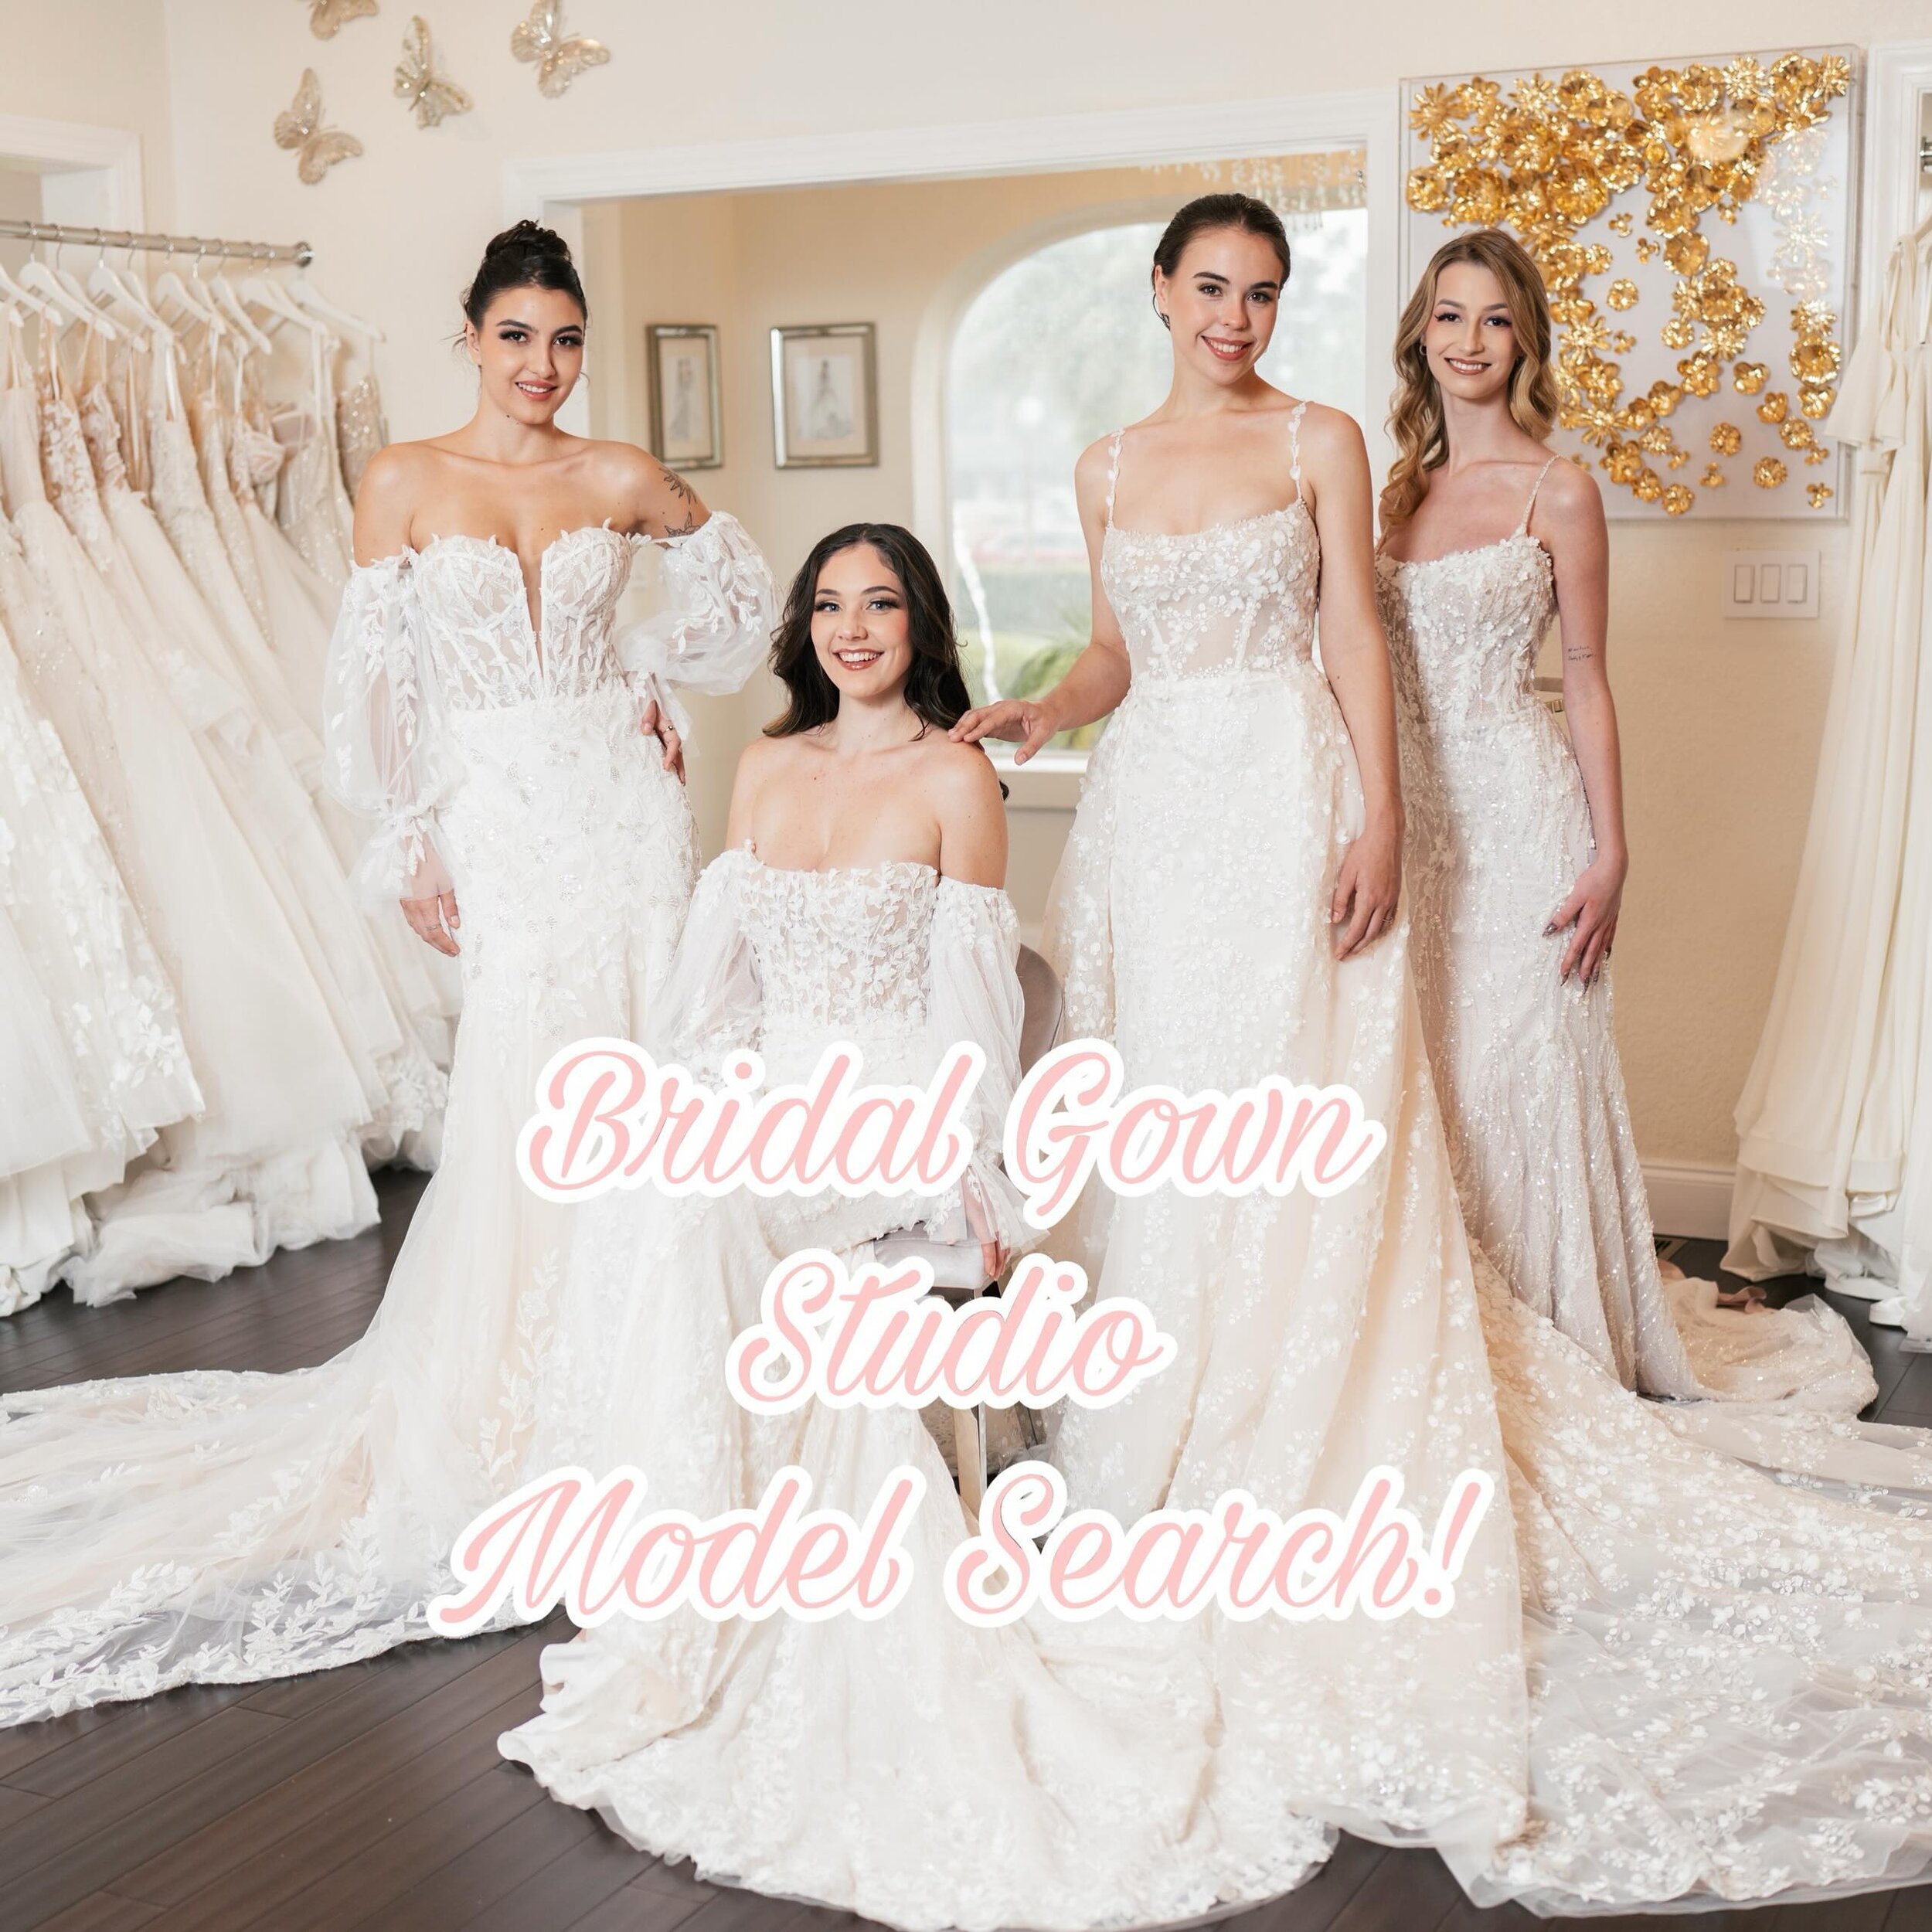 ✨ORLANDO✨ We are looking for models to shoot our newest collection! If you&rsquo;re interested, please send us a dm or email us at bridalgownstudioorlando@gmail.com with your portfolio 🤍

#bgsbride #weddingdress #orlandobridal #orlandobridalshop #br